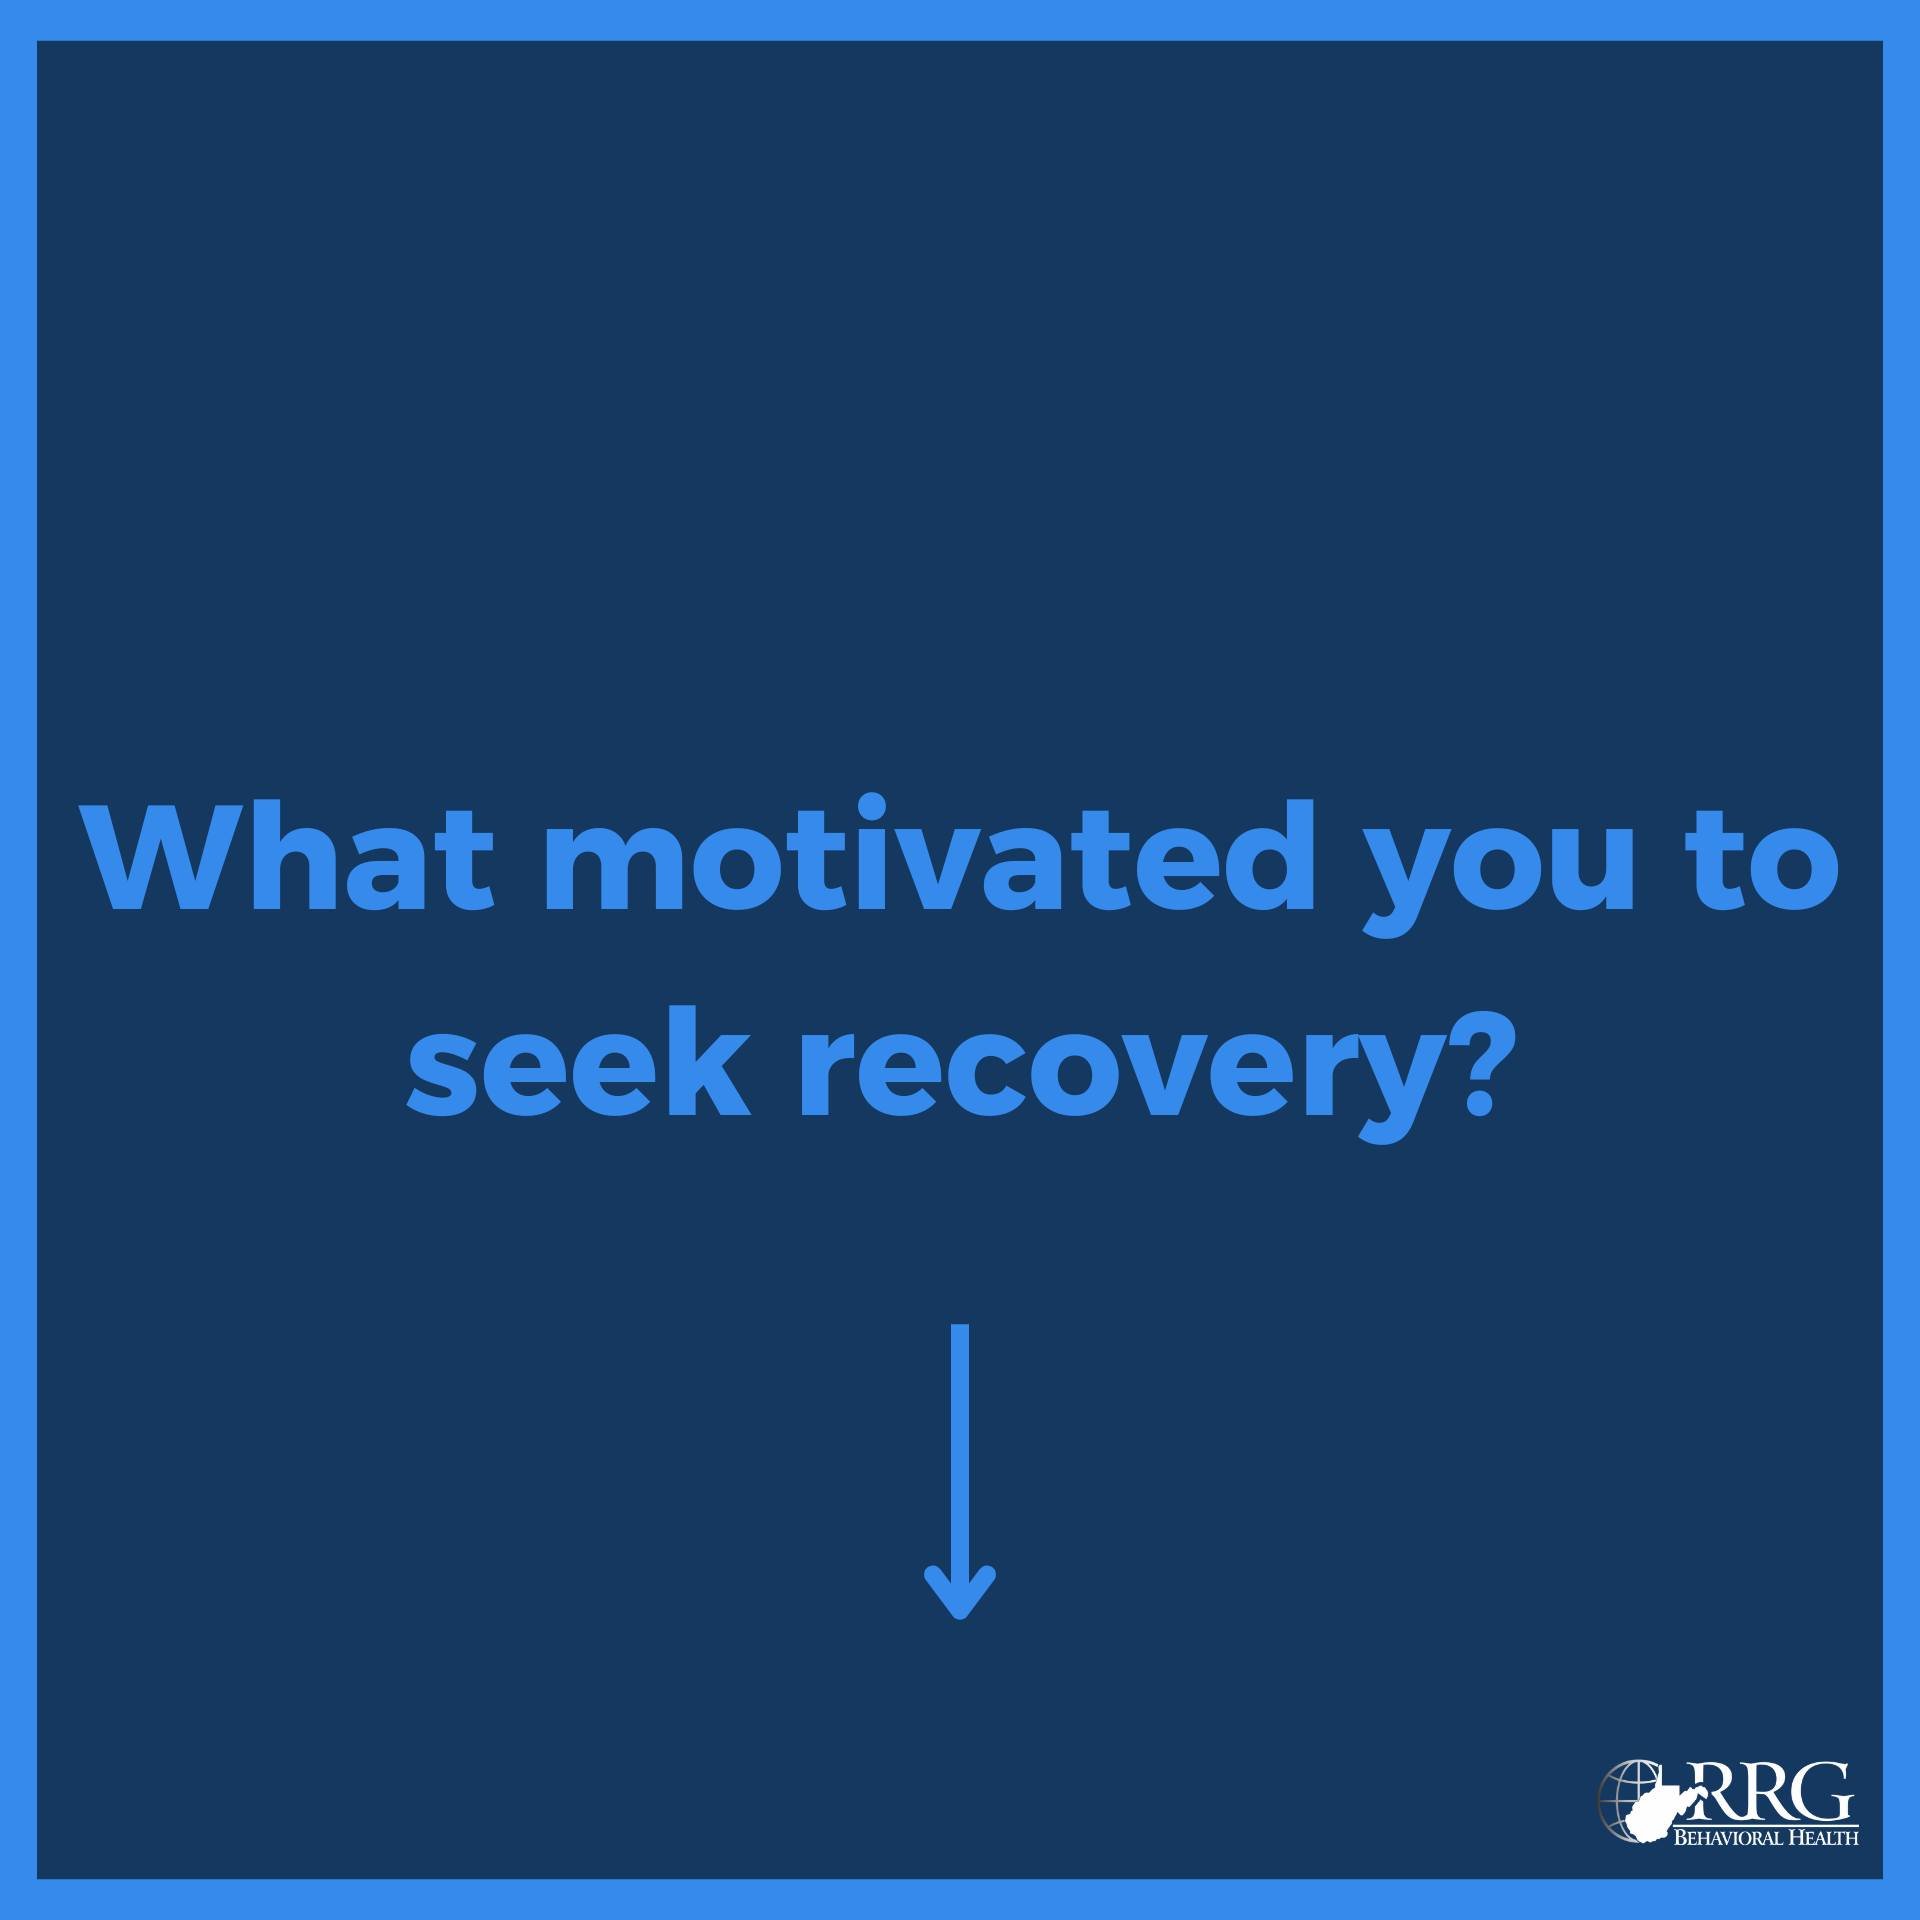 Motivations can be so varied! Regardless of the reason you chose recovery, we are so glad you did!

​#sobriety #sobersigns #recovery #wedorecover